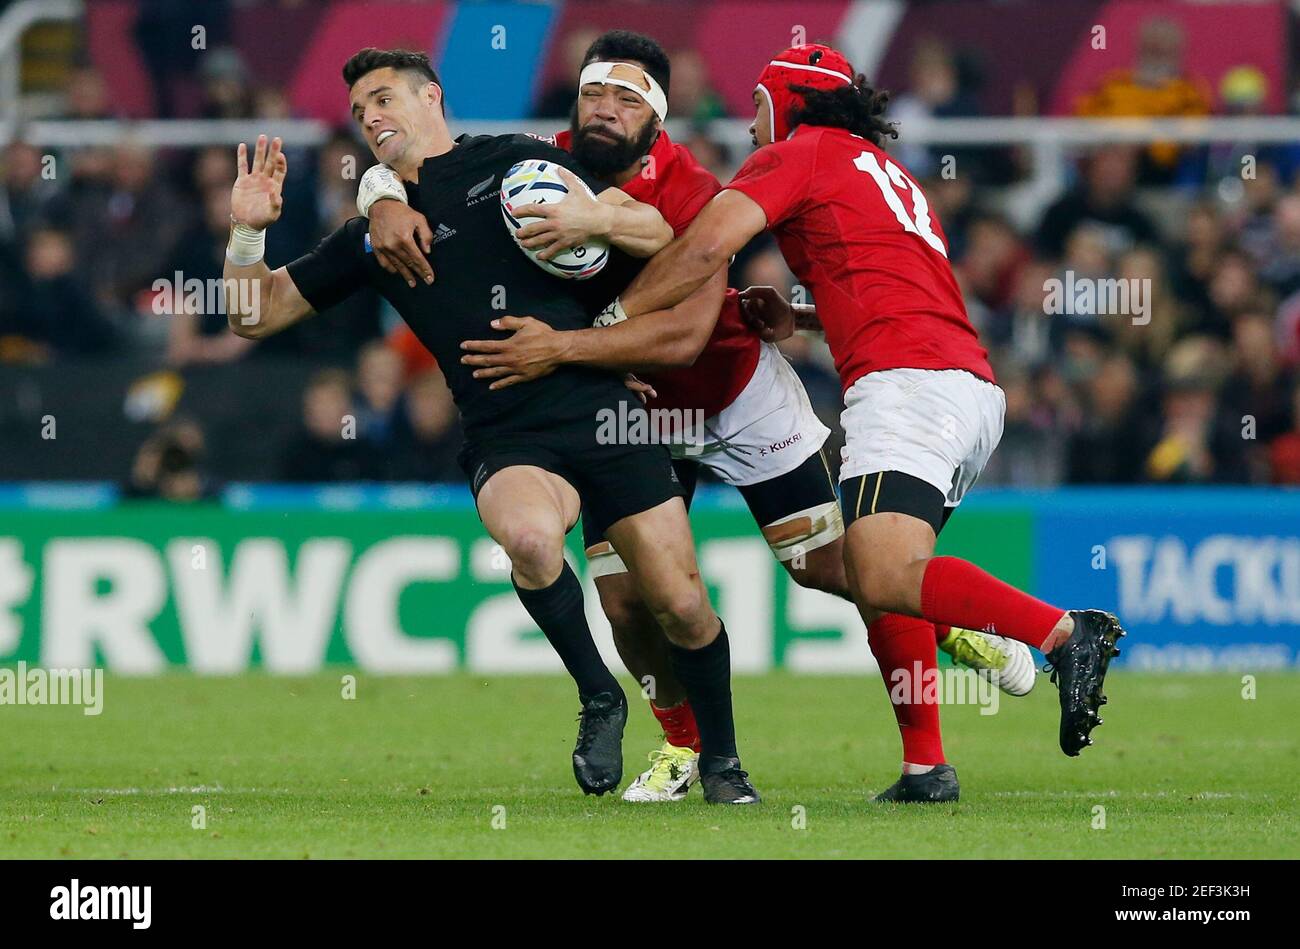 Rugby Union - New Zealand v Tonga - IRB Rugby World Cup 2015 Pool C - St  James' Park, Newcastle, England - 9/10/15 New Zealand's Dan Carter in  action with Tonga's Viliami